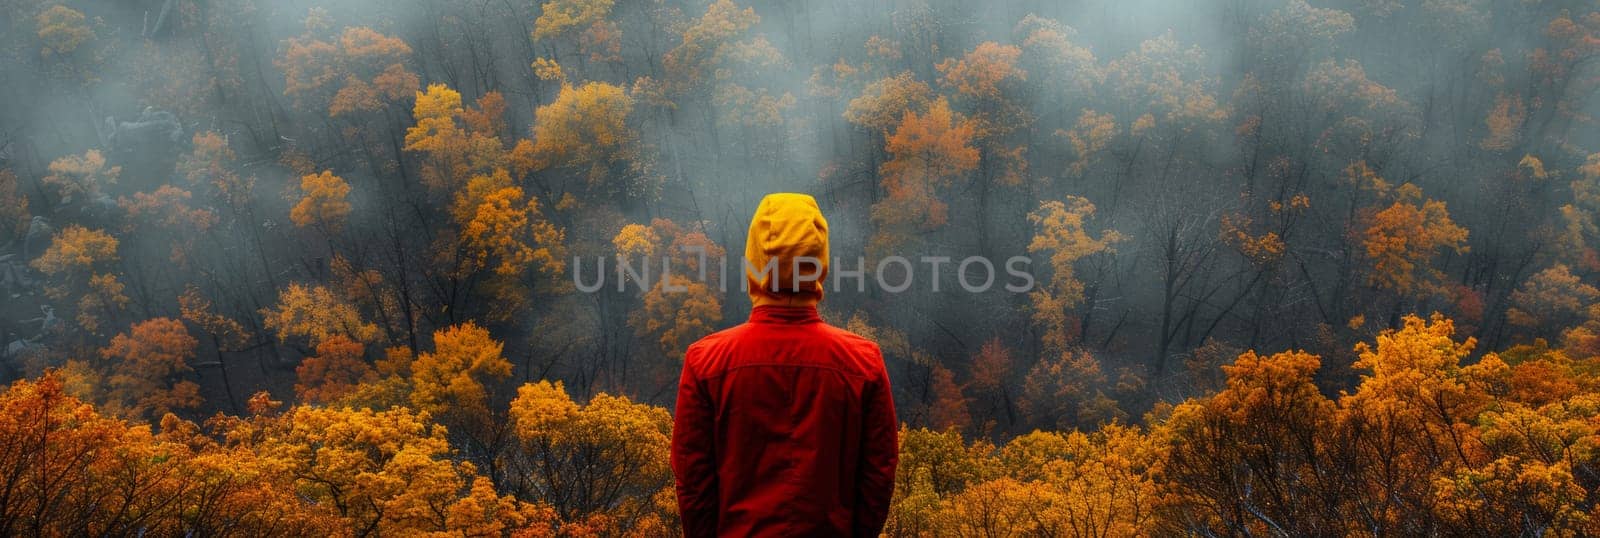 A person in red jacket standing on top of a hill with trees, AI by starush